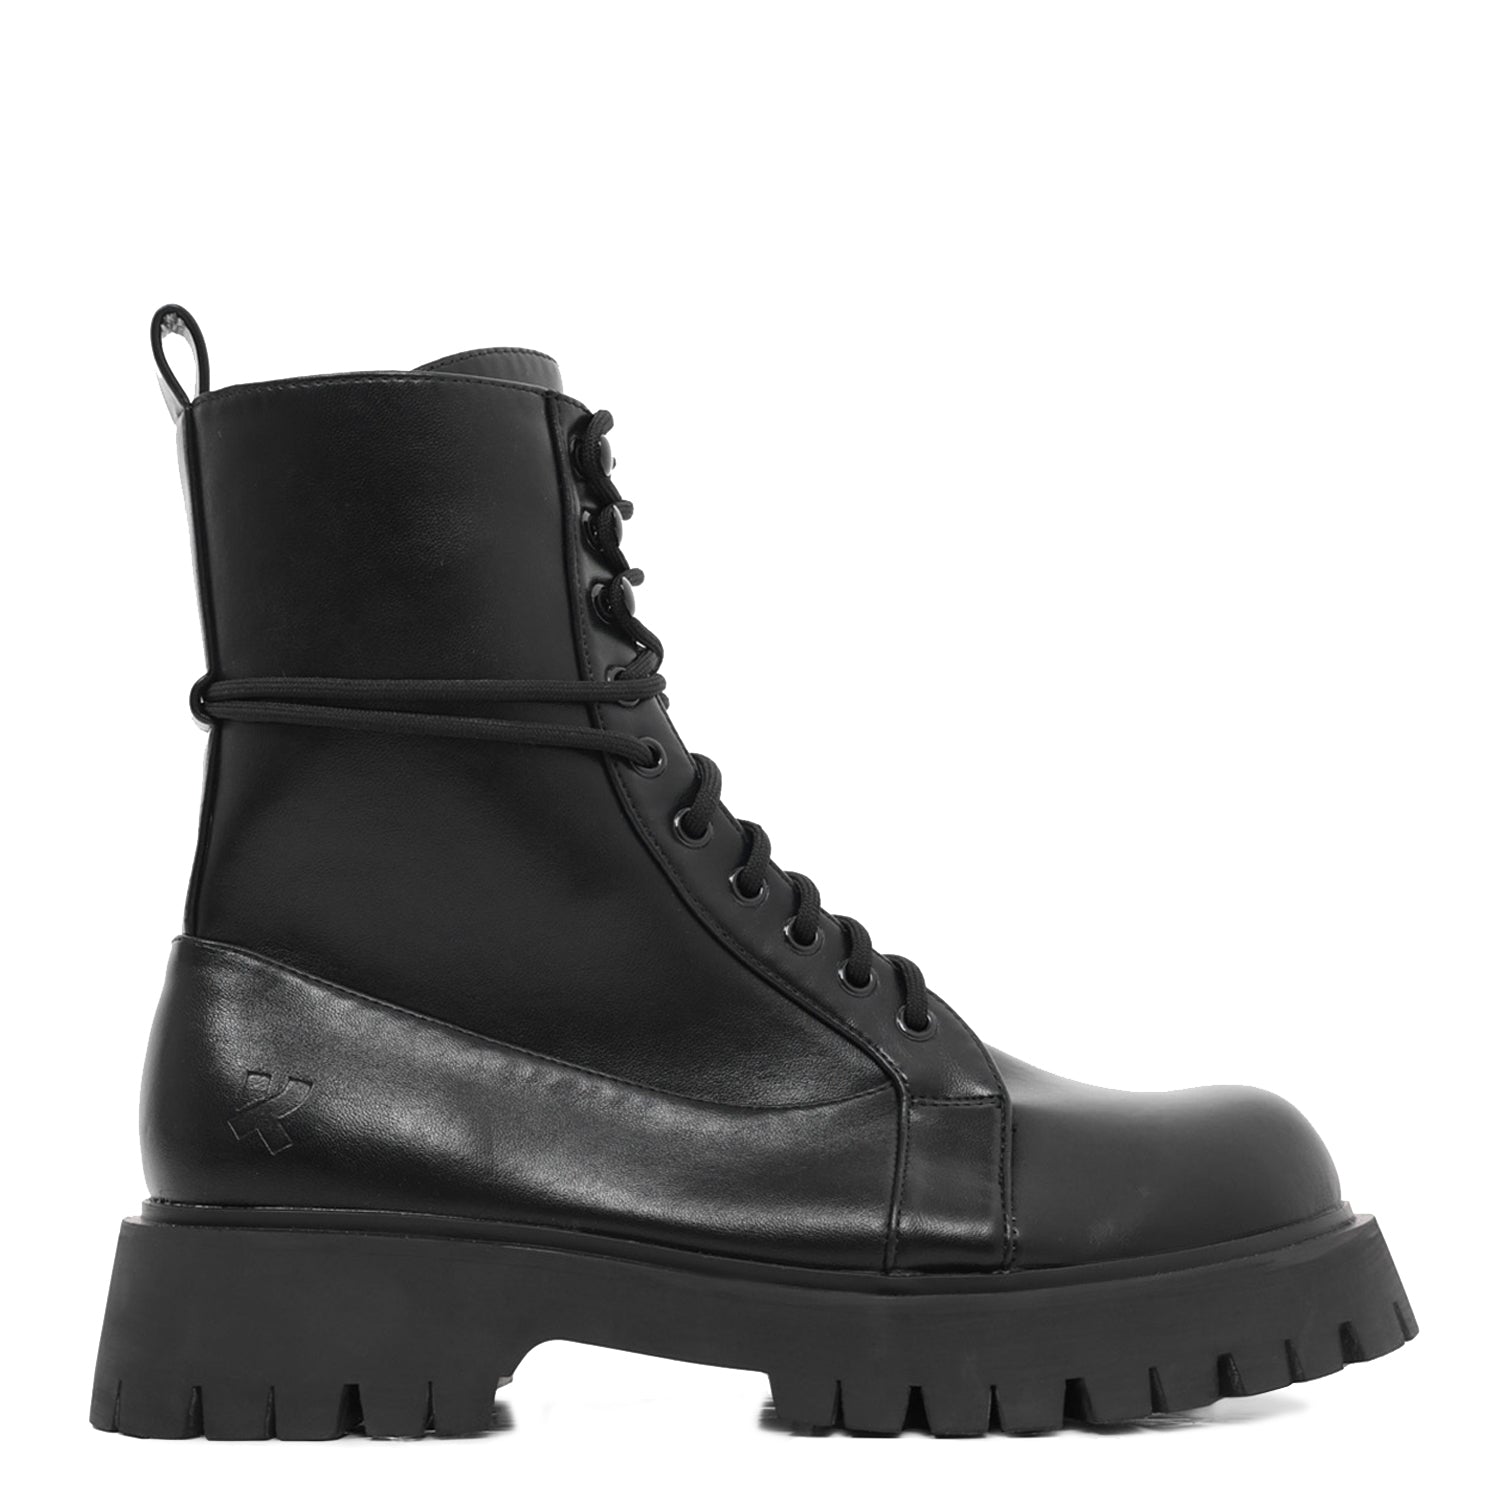 Electic Men's Military Boots – KOI footwear